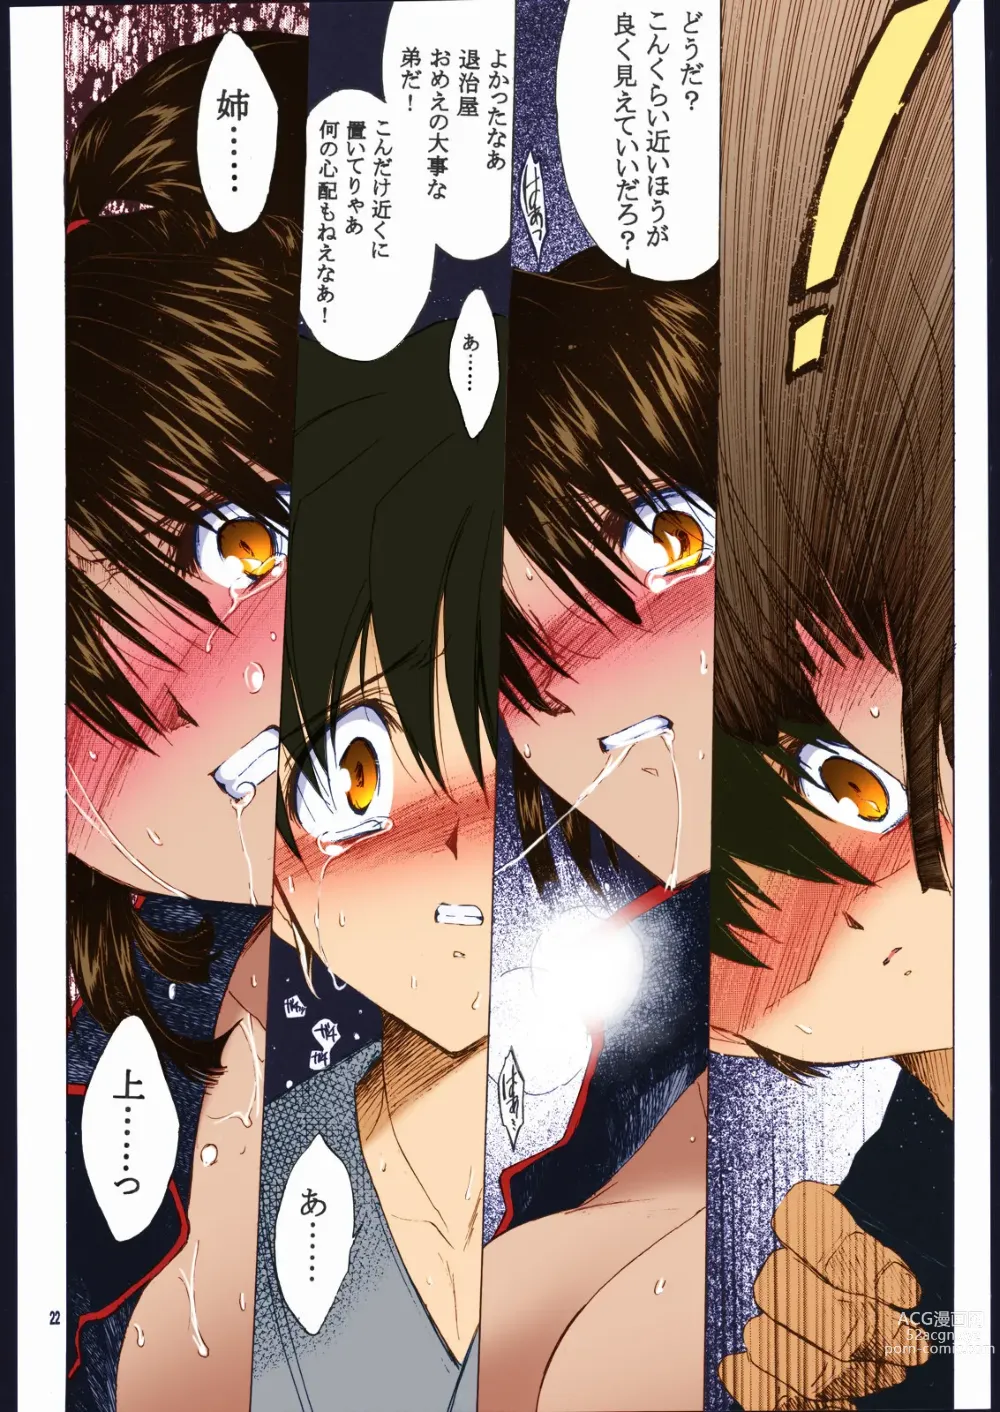 Page 22 of doujinshi HOW TO SHED THE BLOOD OF INNOCENCE